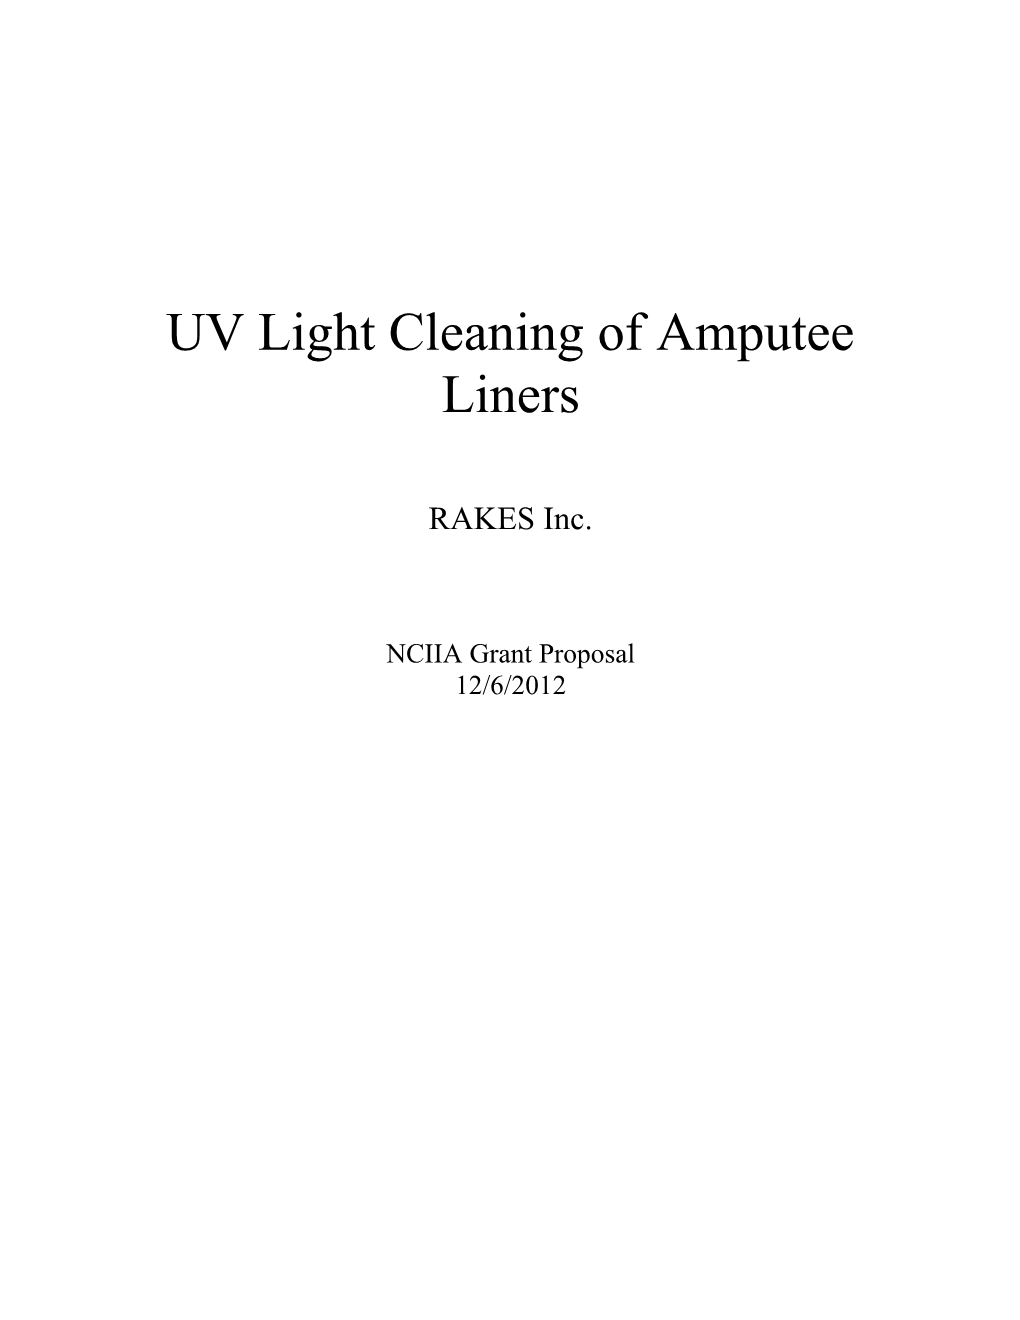 UV Light Cleaning of Amputee Liners